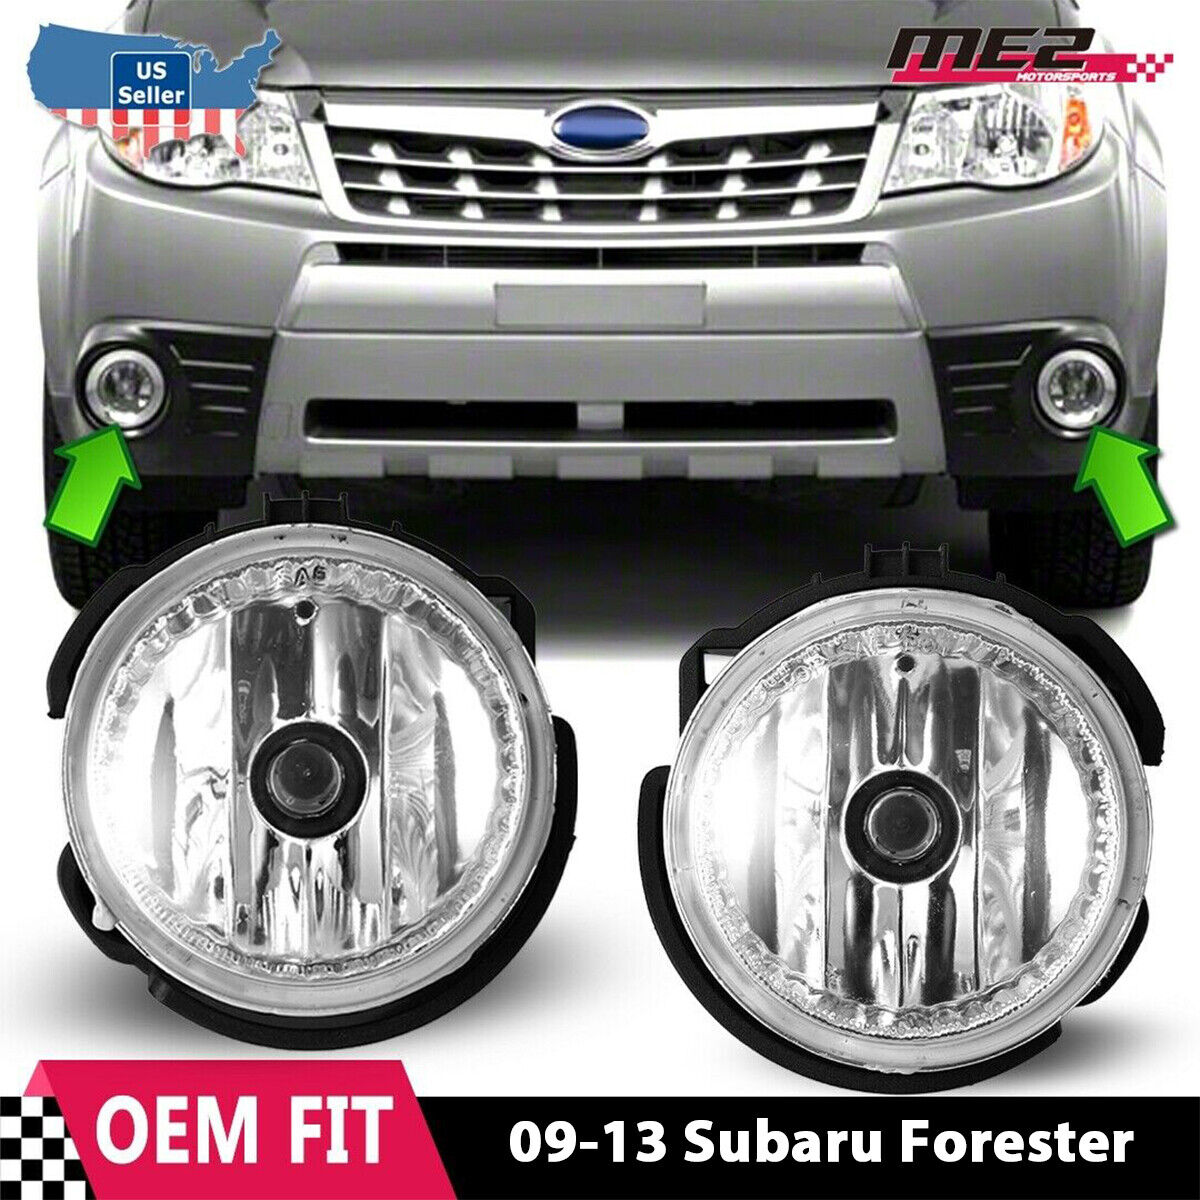 For 2009-2013 Subaru Forester Fog Lights Bumper Driving Lamps Clear Lens Pair